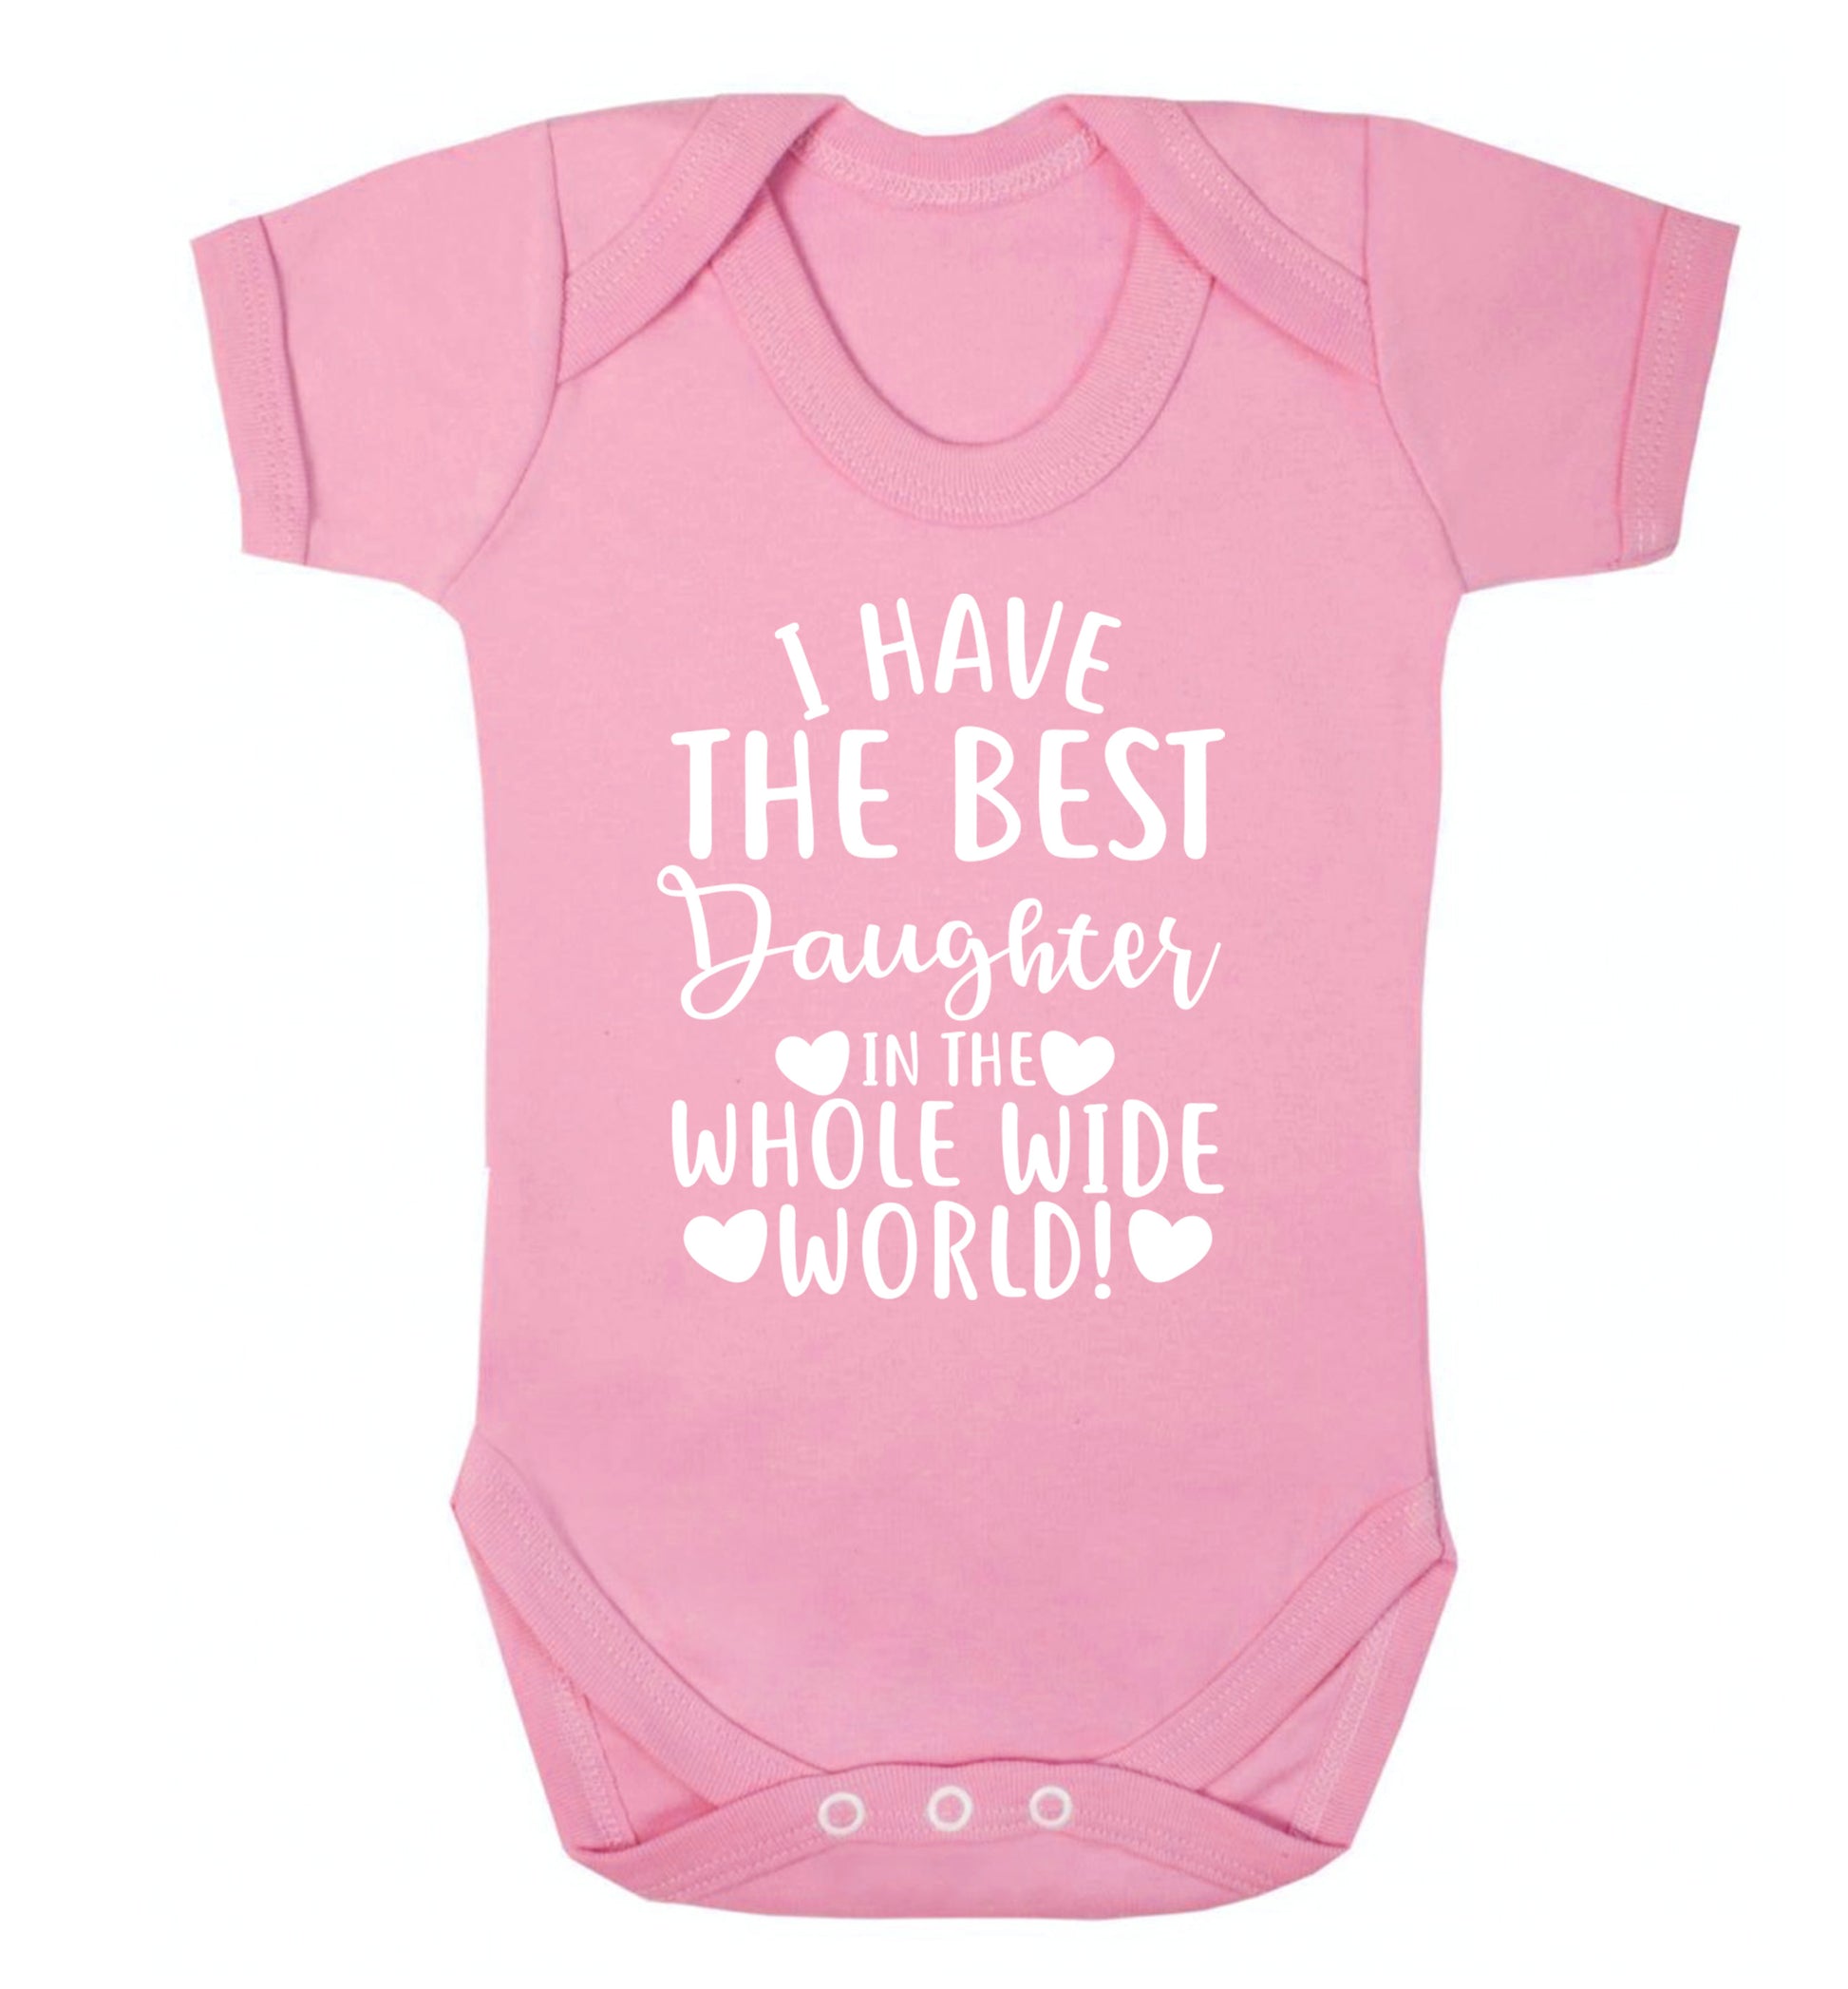 I have the best daughter in the whole wide world! Baby Vest pale pink 18-24 months